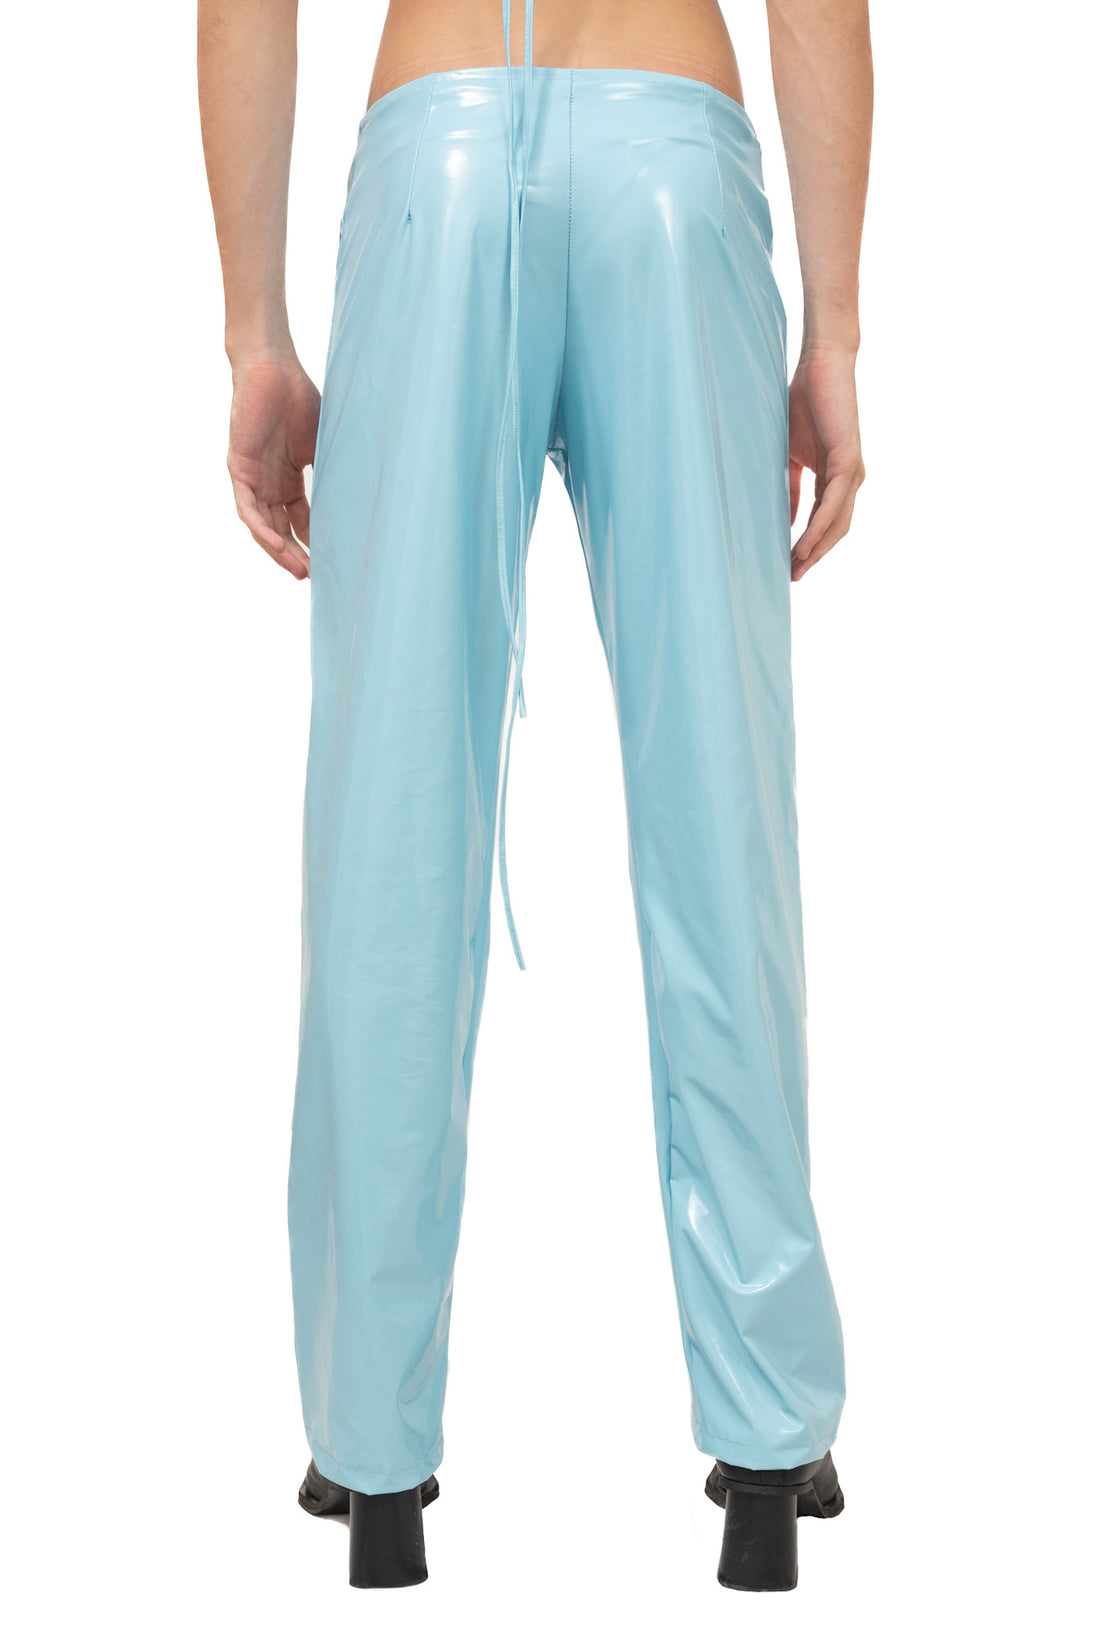 Baby Blue Latex Lace Pant